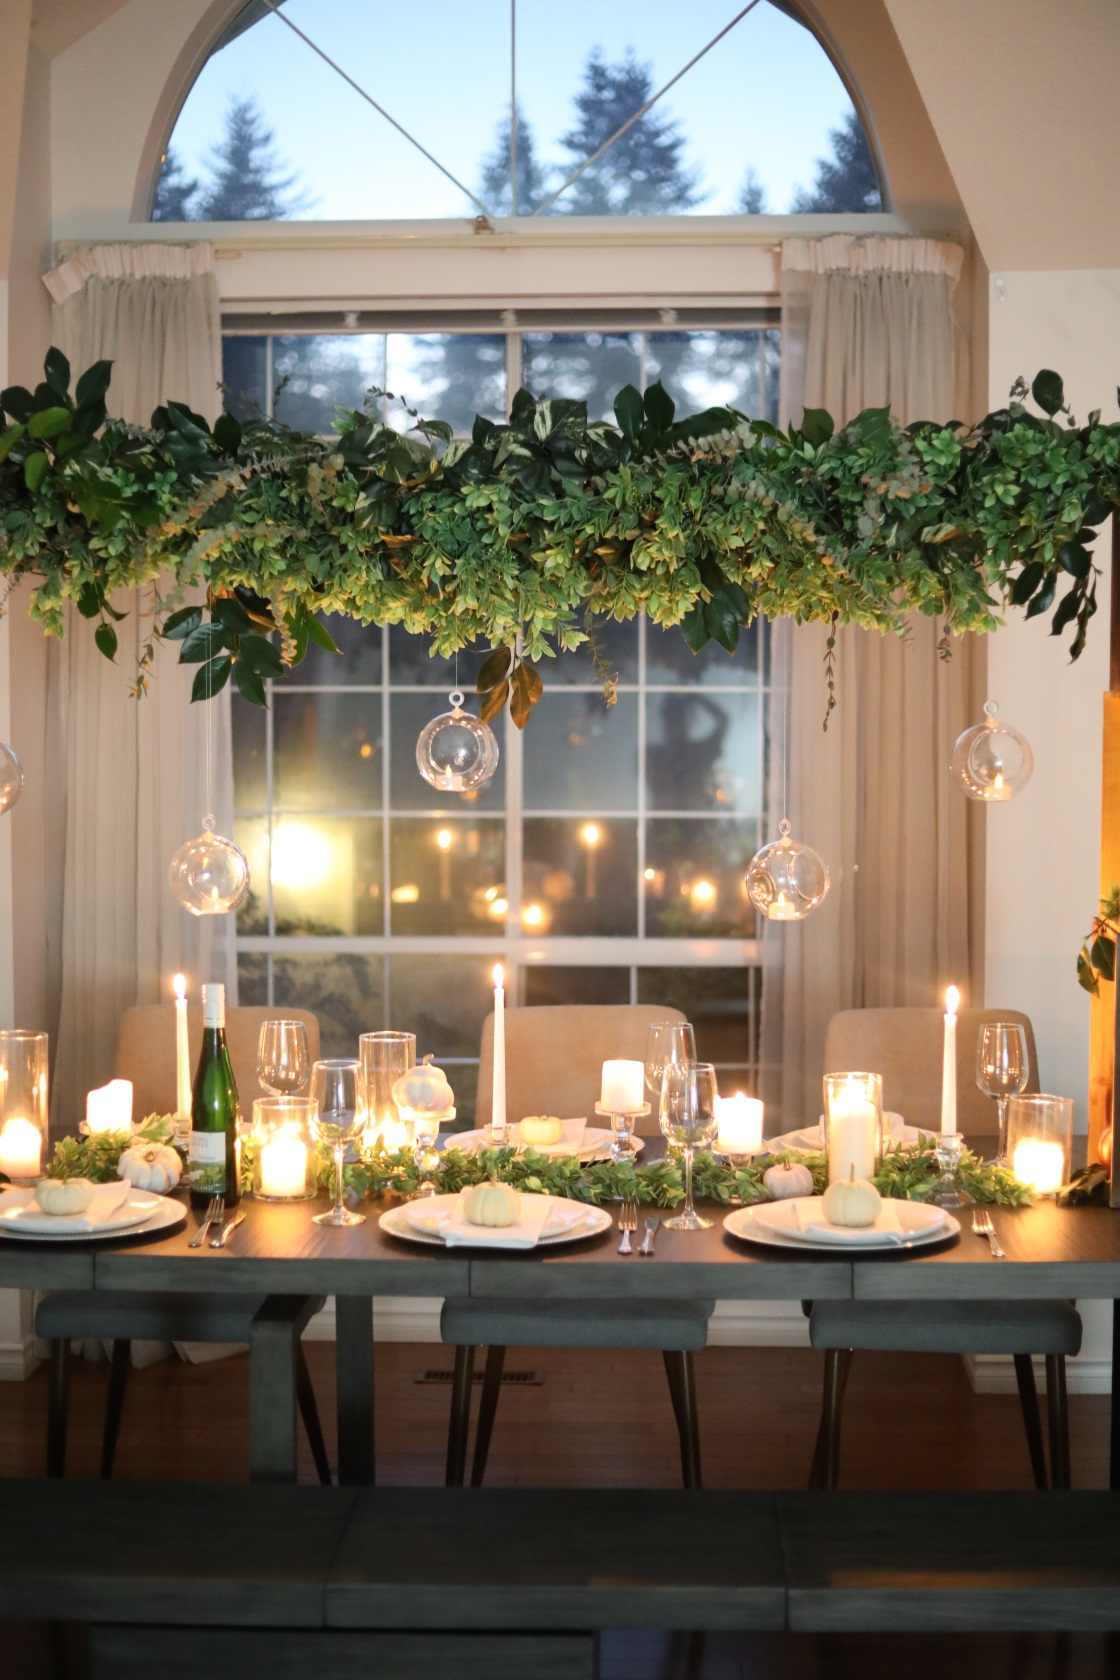 A table decorated with greenery.